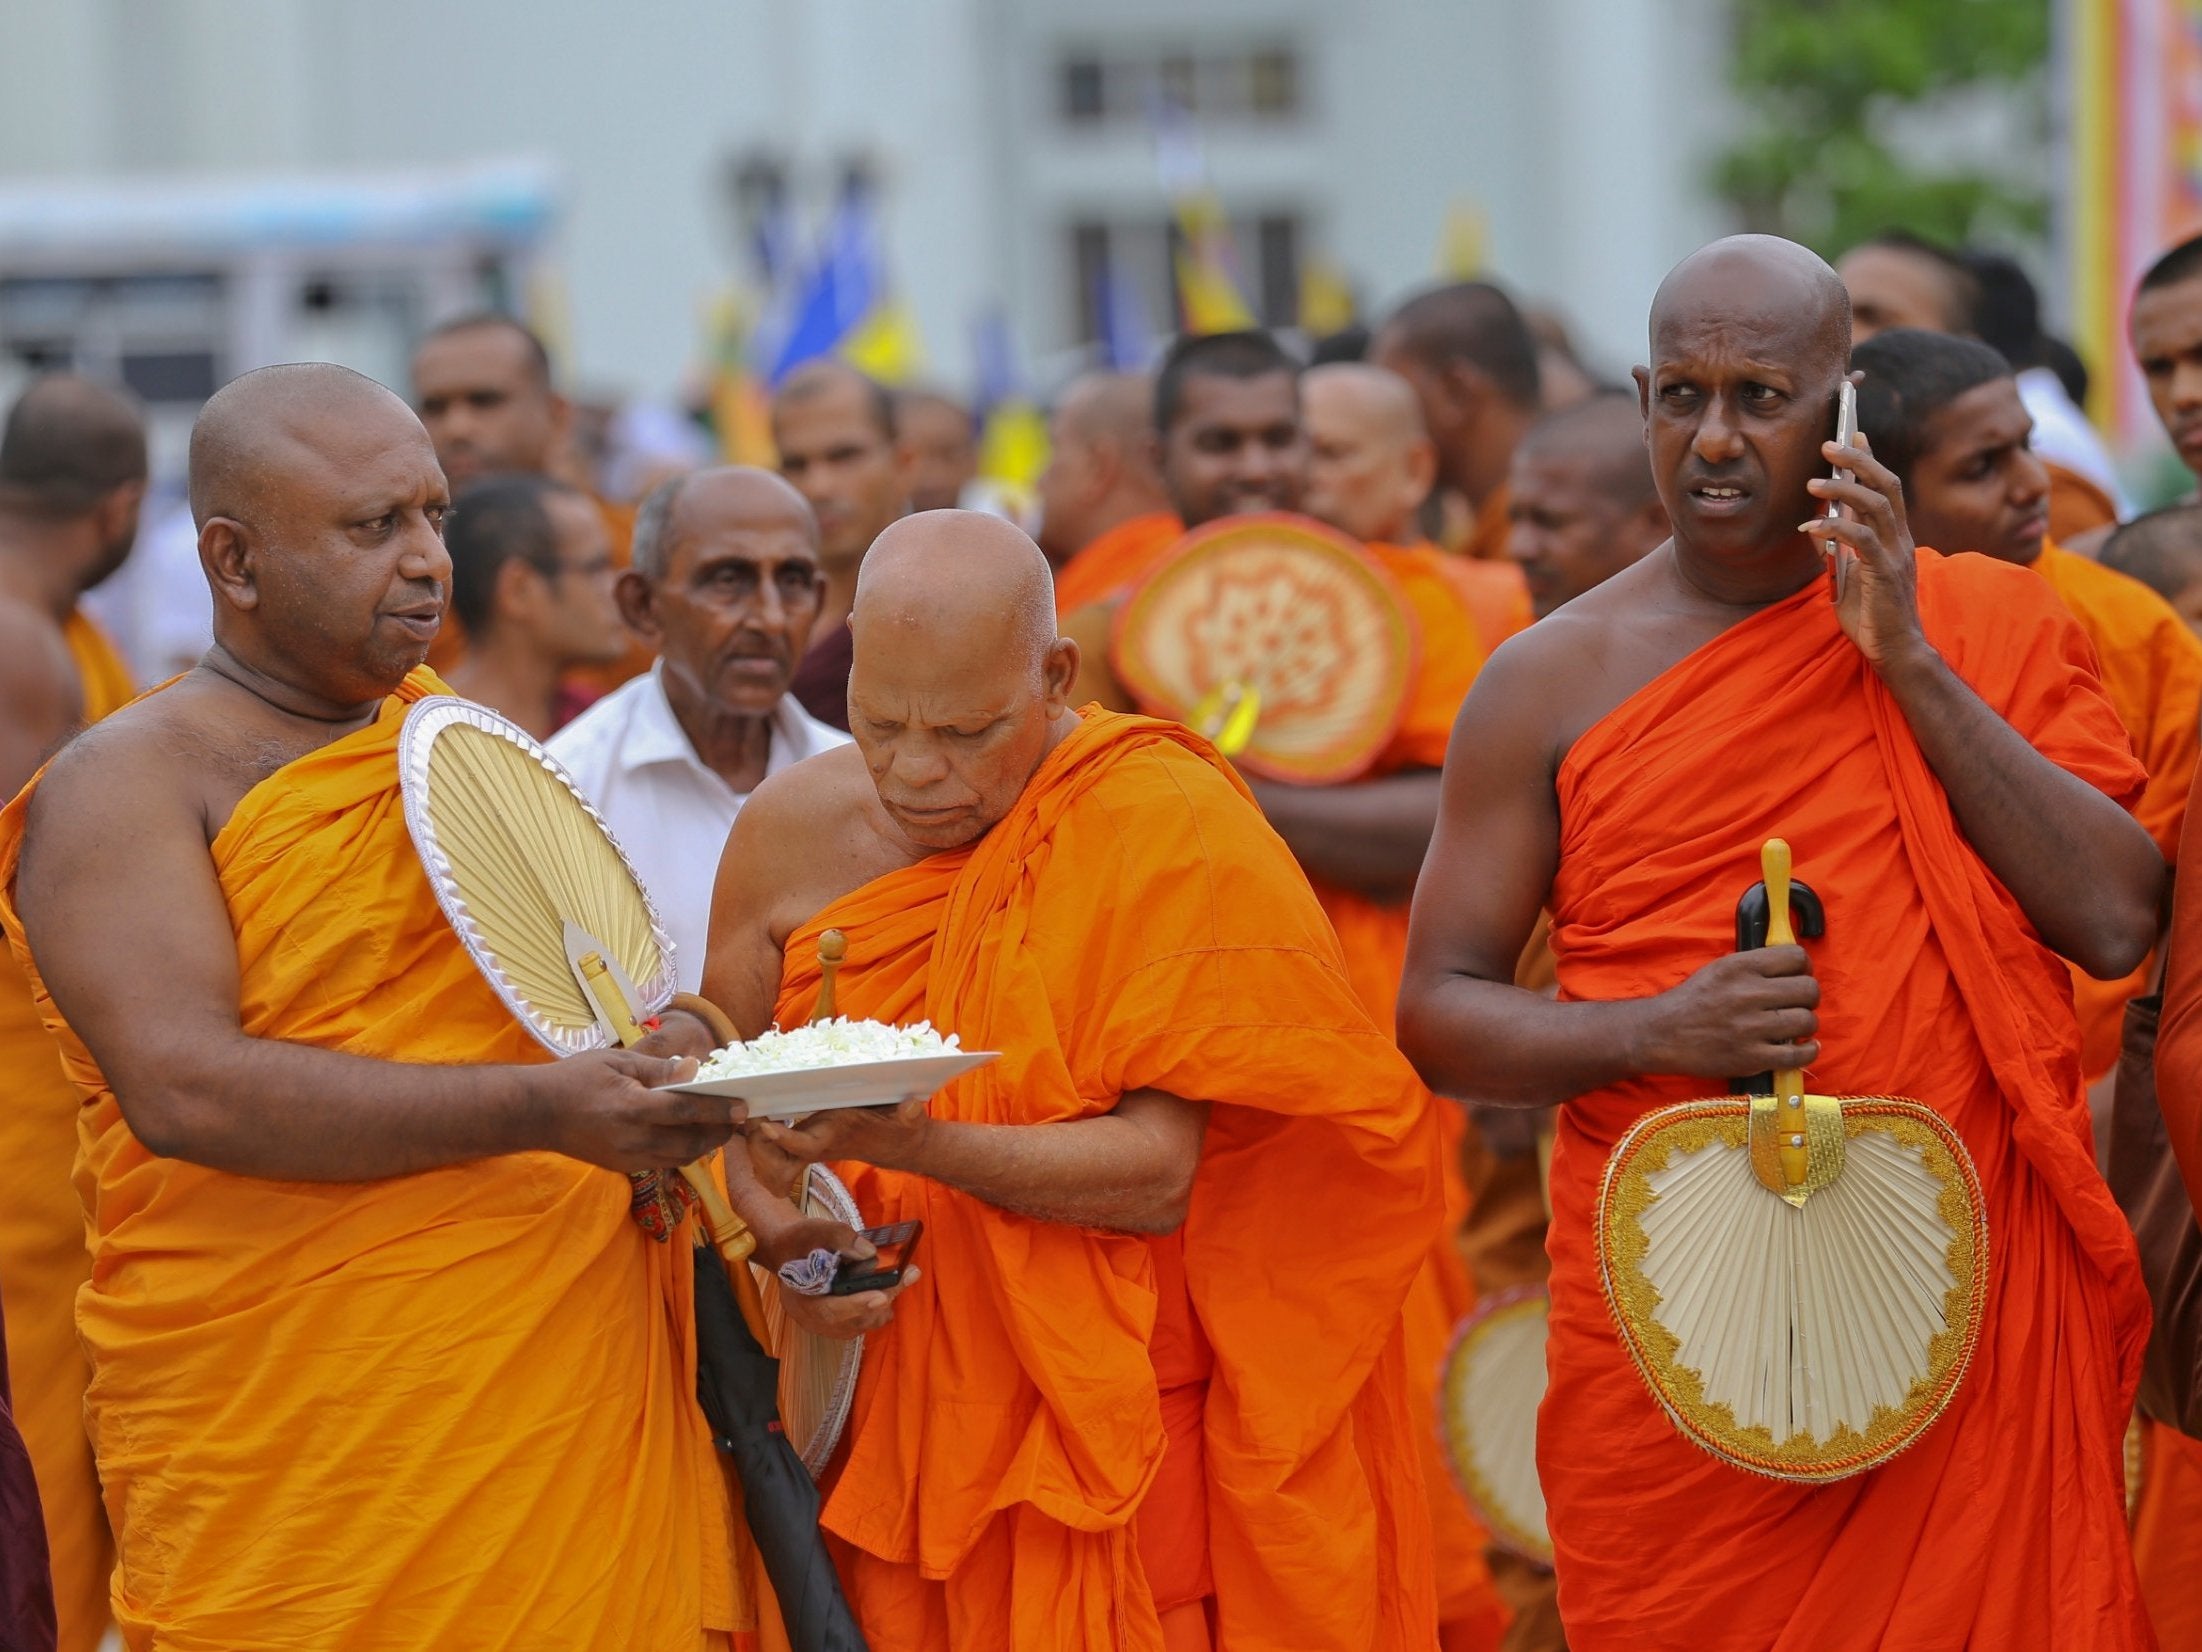 Sri Lankan Buddhist monks supporting ousted prime minister Ranil Wickremesinghe take part in convention held to appeal president Maithripala Sirisena to convene the parliament and restore democracy in Colombo on Tuesday